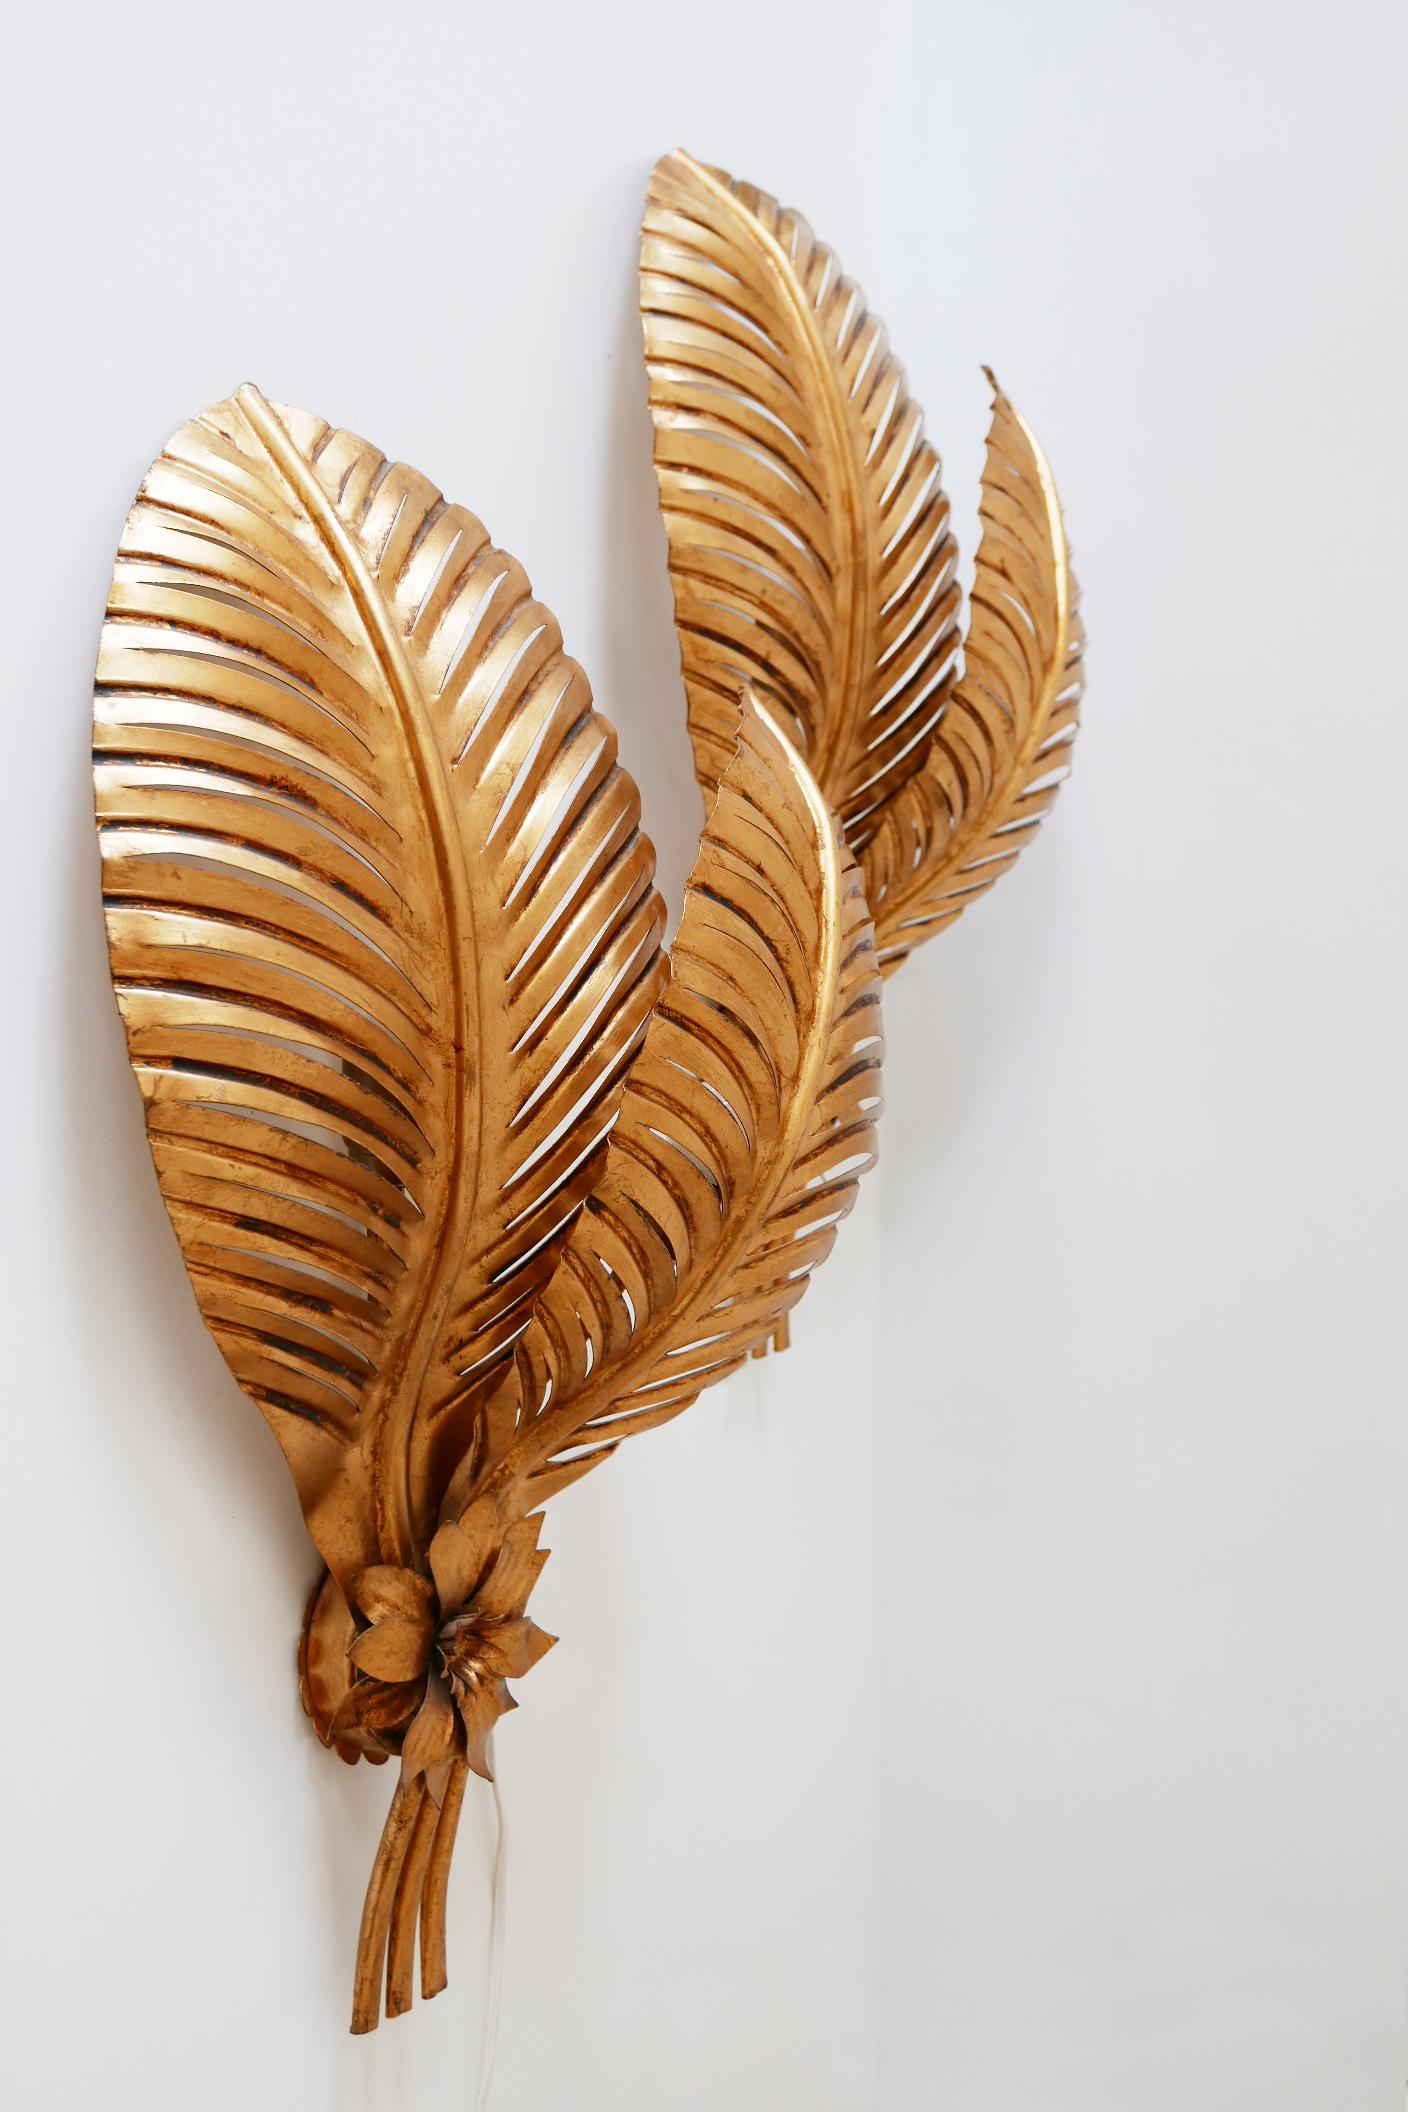 Set of Two Extra Large Gilt Metal Palm Leaf Wall Lamps, Hans Kögl, 1970s Germany For Sale 6